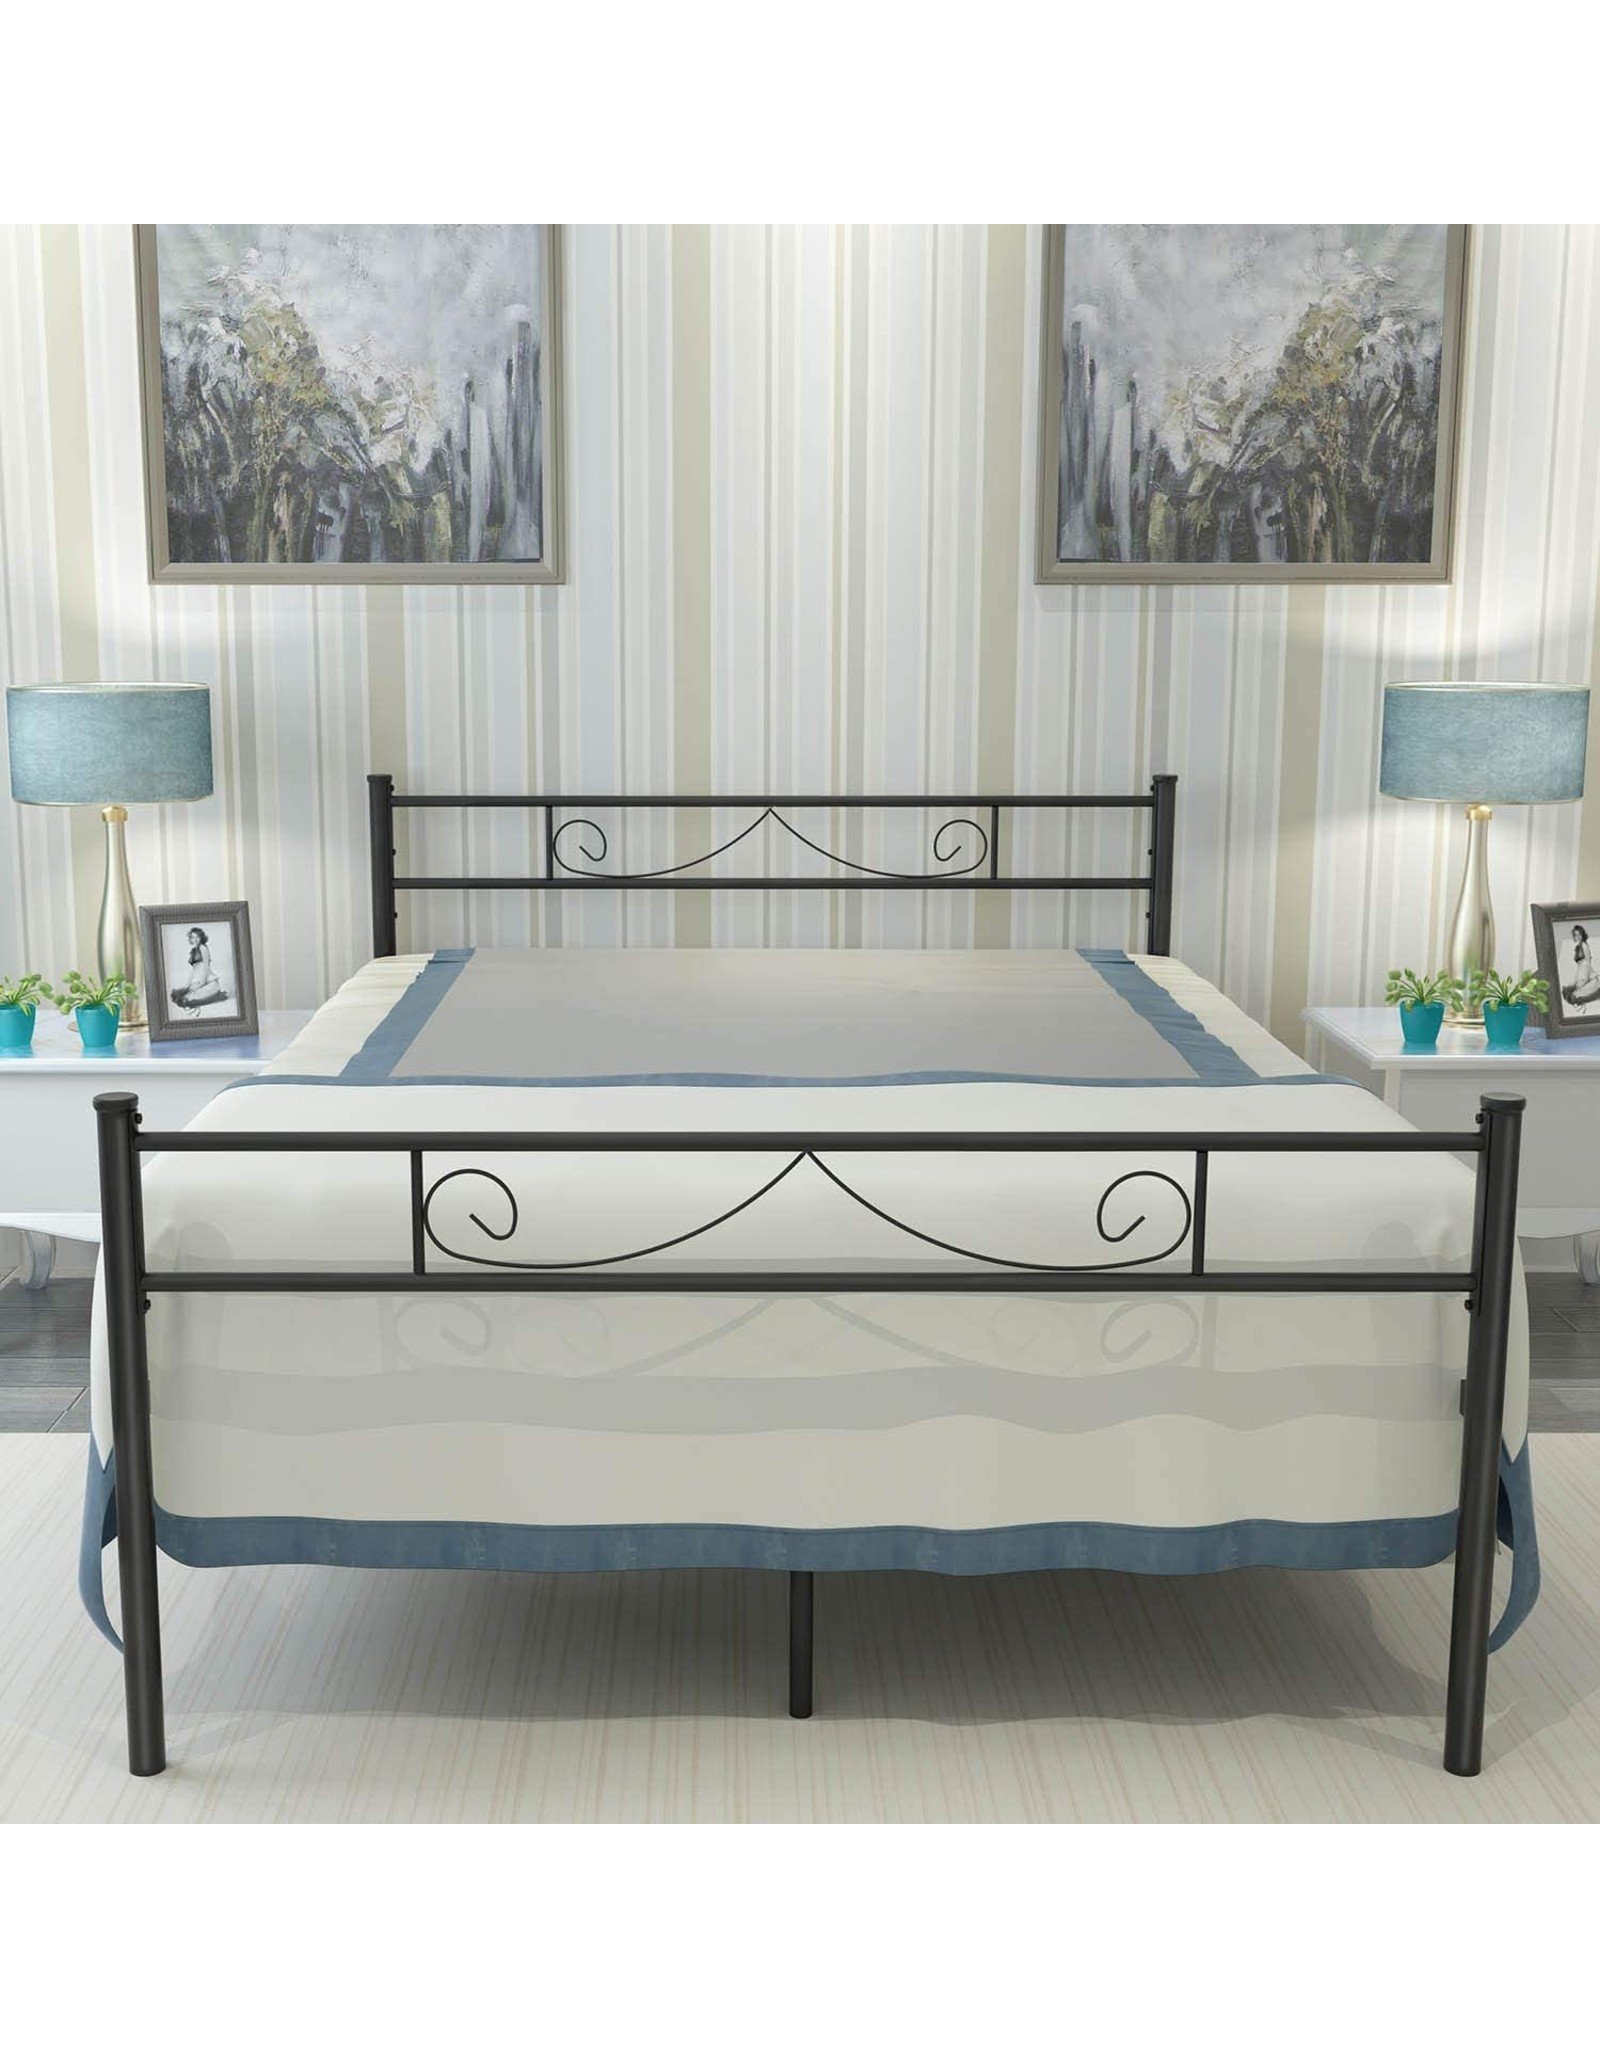 Haageep 18 Inch Queen Bed Frame, 18 Inch Metal Bed Frame